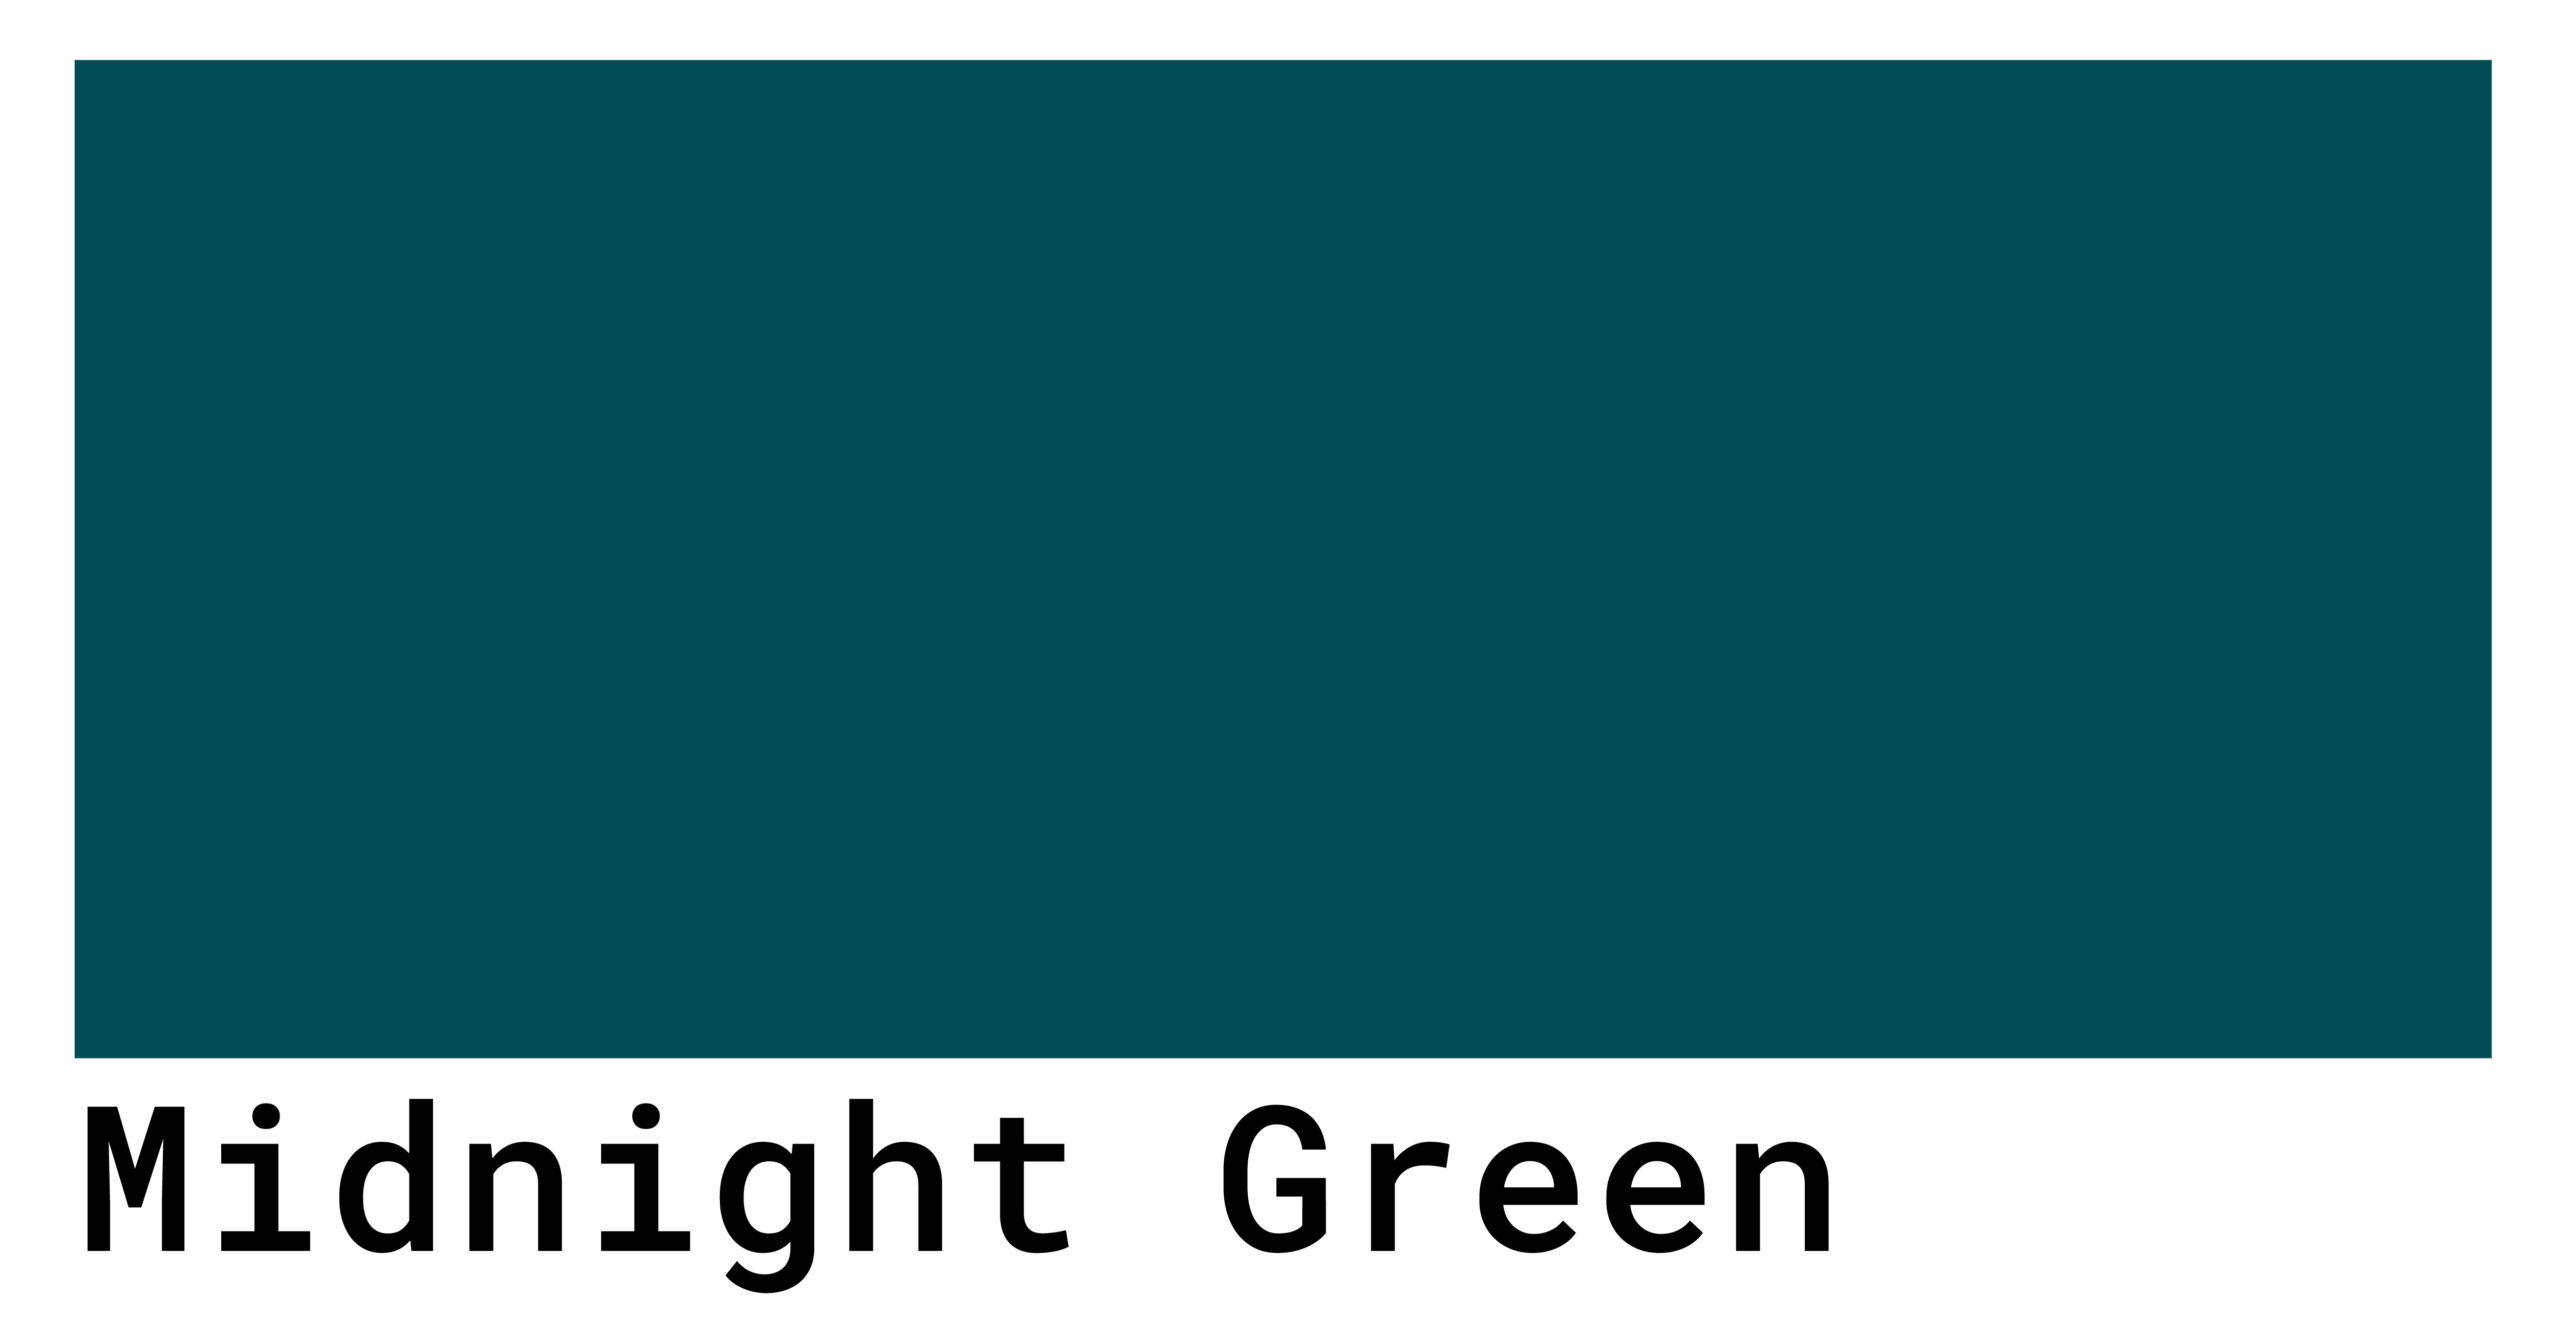 midnight green color swatch scaled